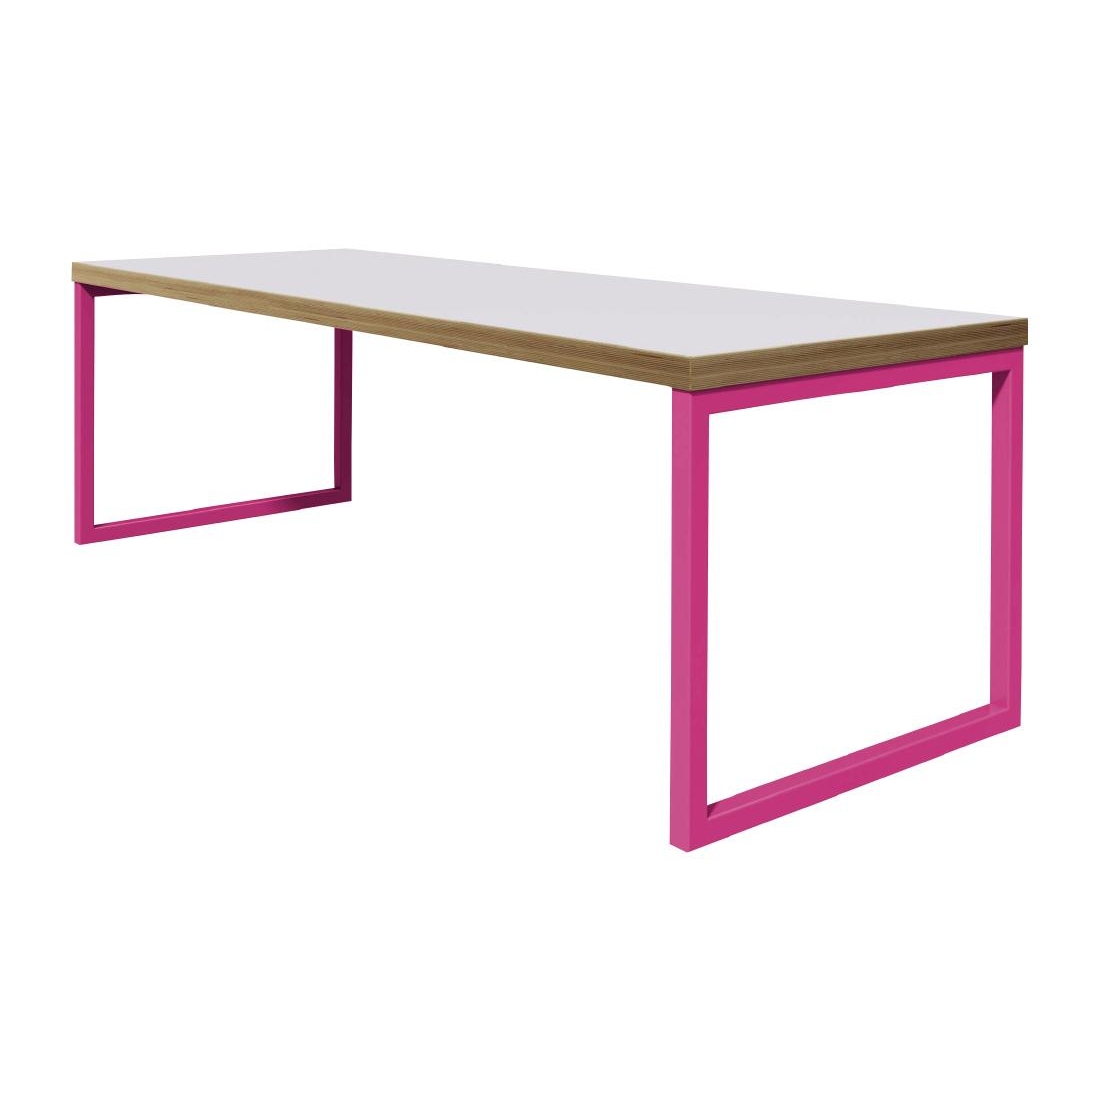 Bolero Dining Table White with Pink Frame 6ft